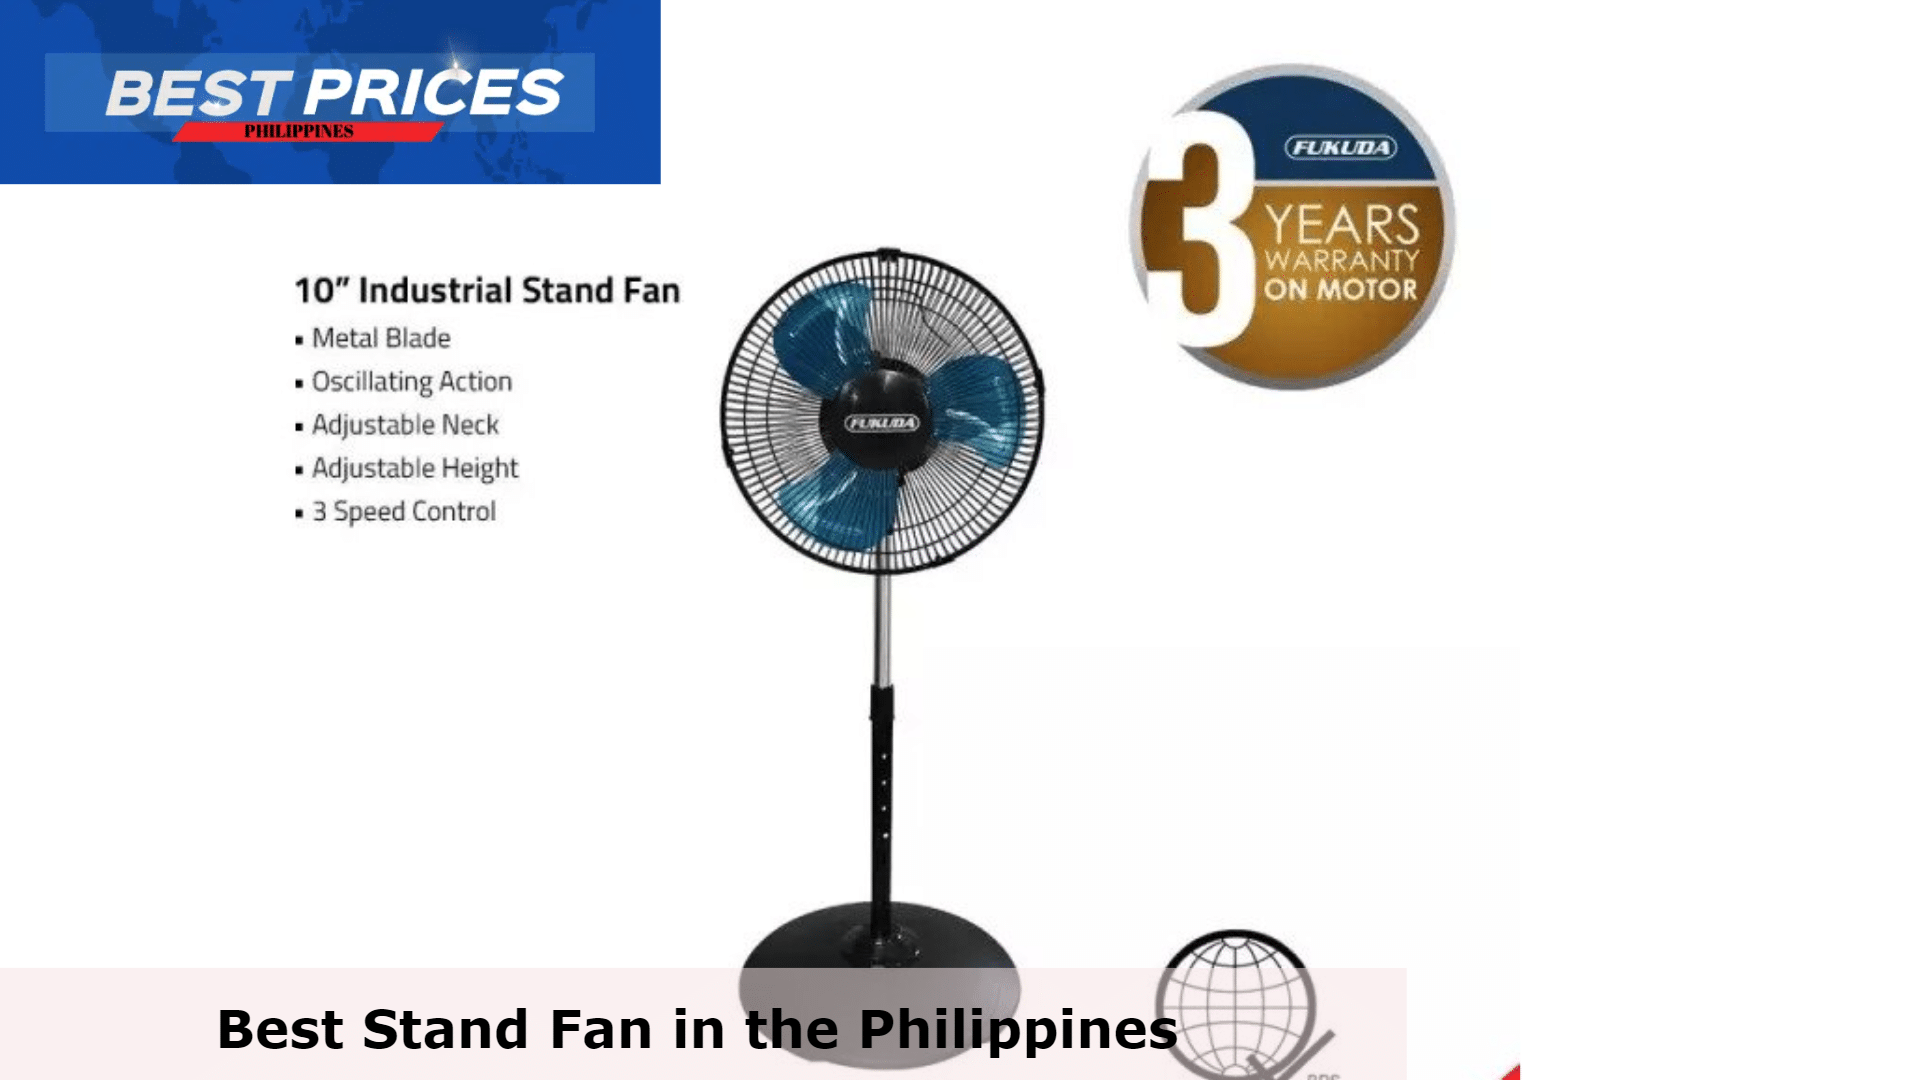 Fukuda FG128 10" Industrial Stand Fan - Best Stand Fan in the Philippines, Stand Fan Philippines, What is the best electric fan Philippines?, How much is union stand fan in Philippines?, Which stand fan is best for bedroom?, How much is Asahi electric fan Philippines?, best stand fan philippines, What is the best electric fan Philippines?, Which electric fan brand is best?, Is hanabishi electric fan a good brand?, Which is better tower fan or stand fan?, most quiet stand fan philippines, stand fan philippines price, asahi stand fan price philippines, electric fan philippines, electric stand fan price philippines, hanabishi stand fan, camel stand fan price philippines,